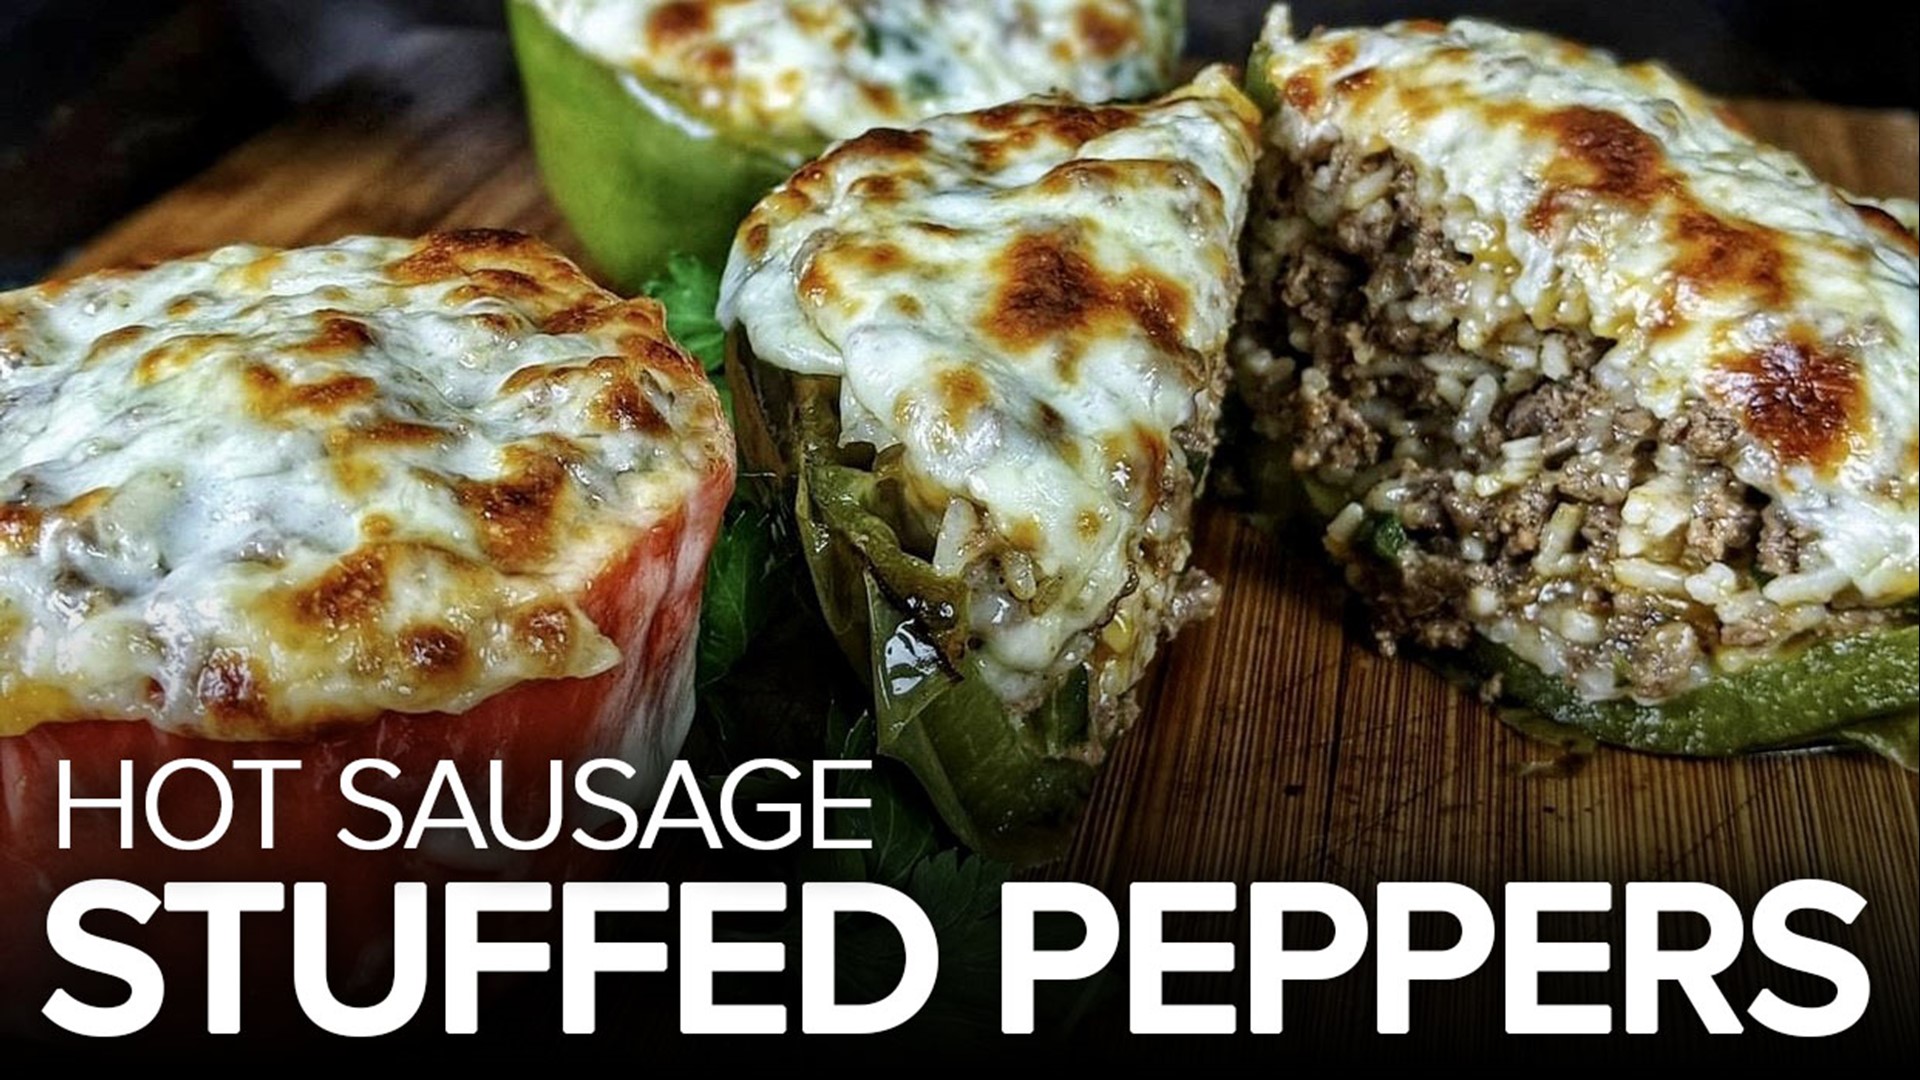 In Louisiana, we LOVE hot sausage. That's why I'm making hot sausage stuffed bell peppers today!